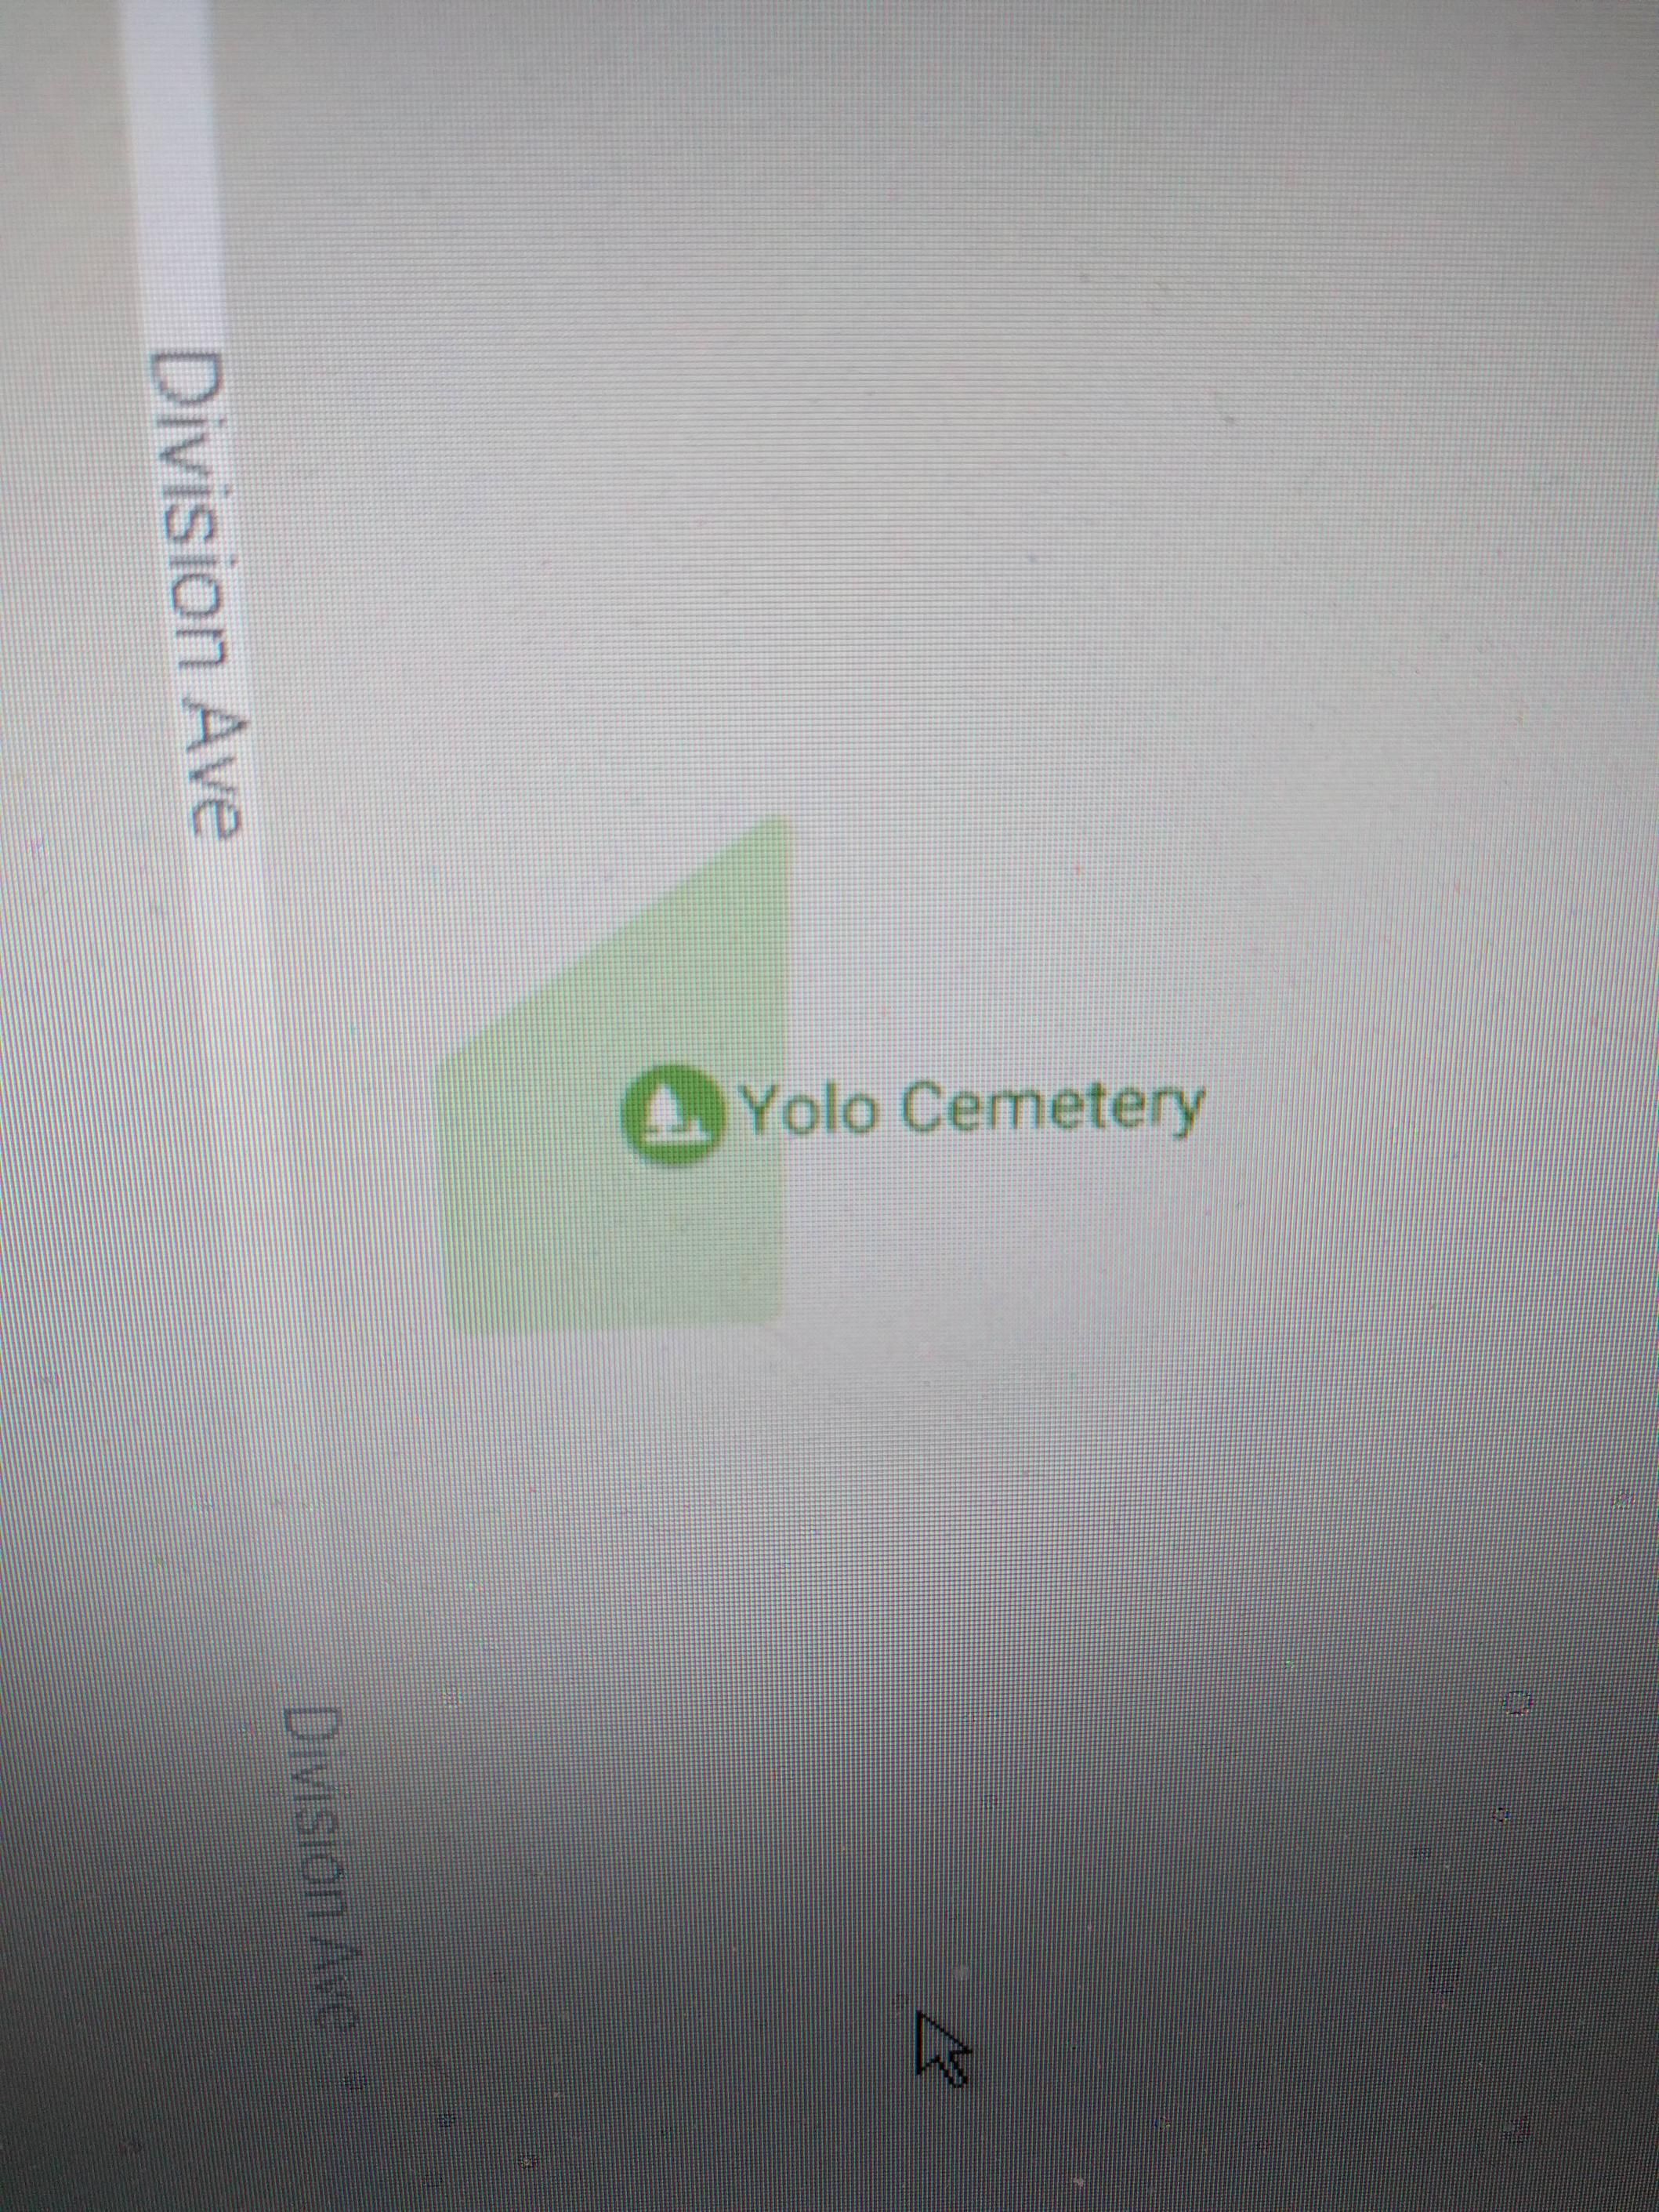 what an appropriate name for a cemetery...